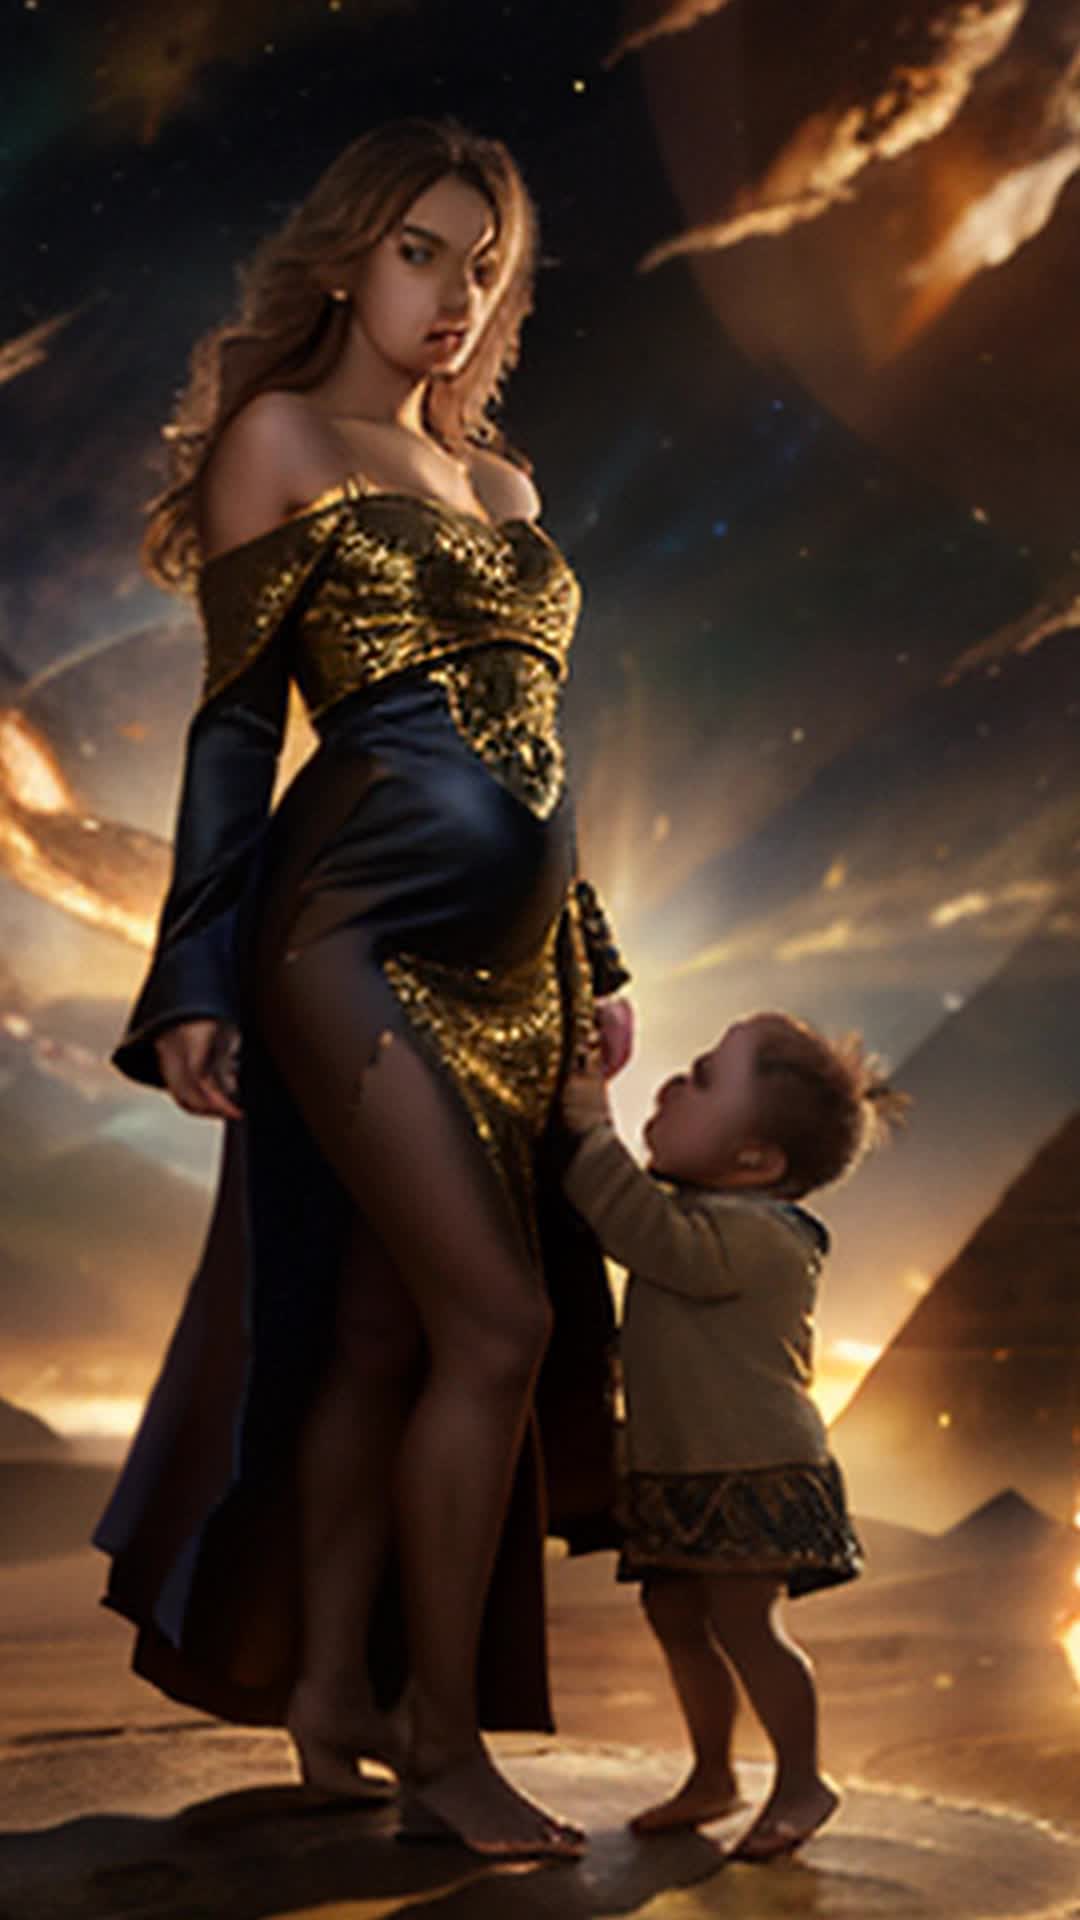 Woman in matching regal attire, swiftly handing baby to man, prepared stance, celestial domain defense, galaxies overhead, floating pyramids background, highly detailed